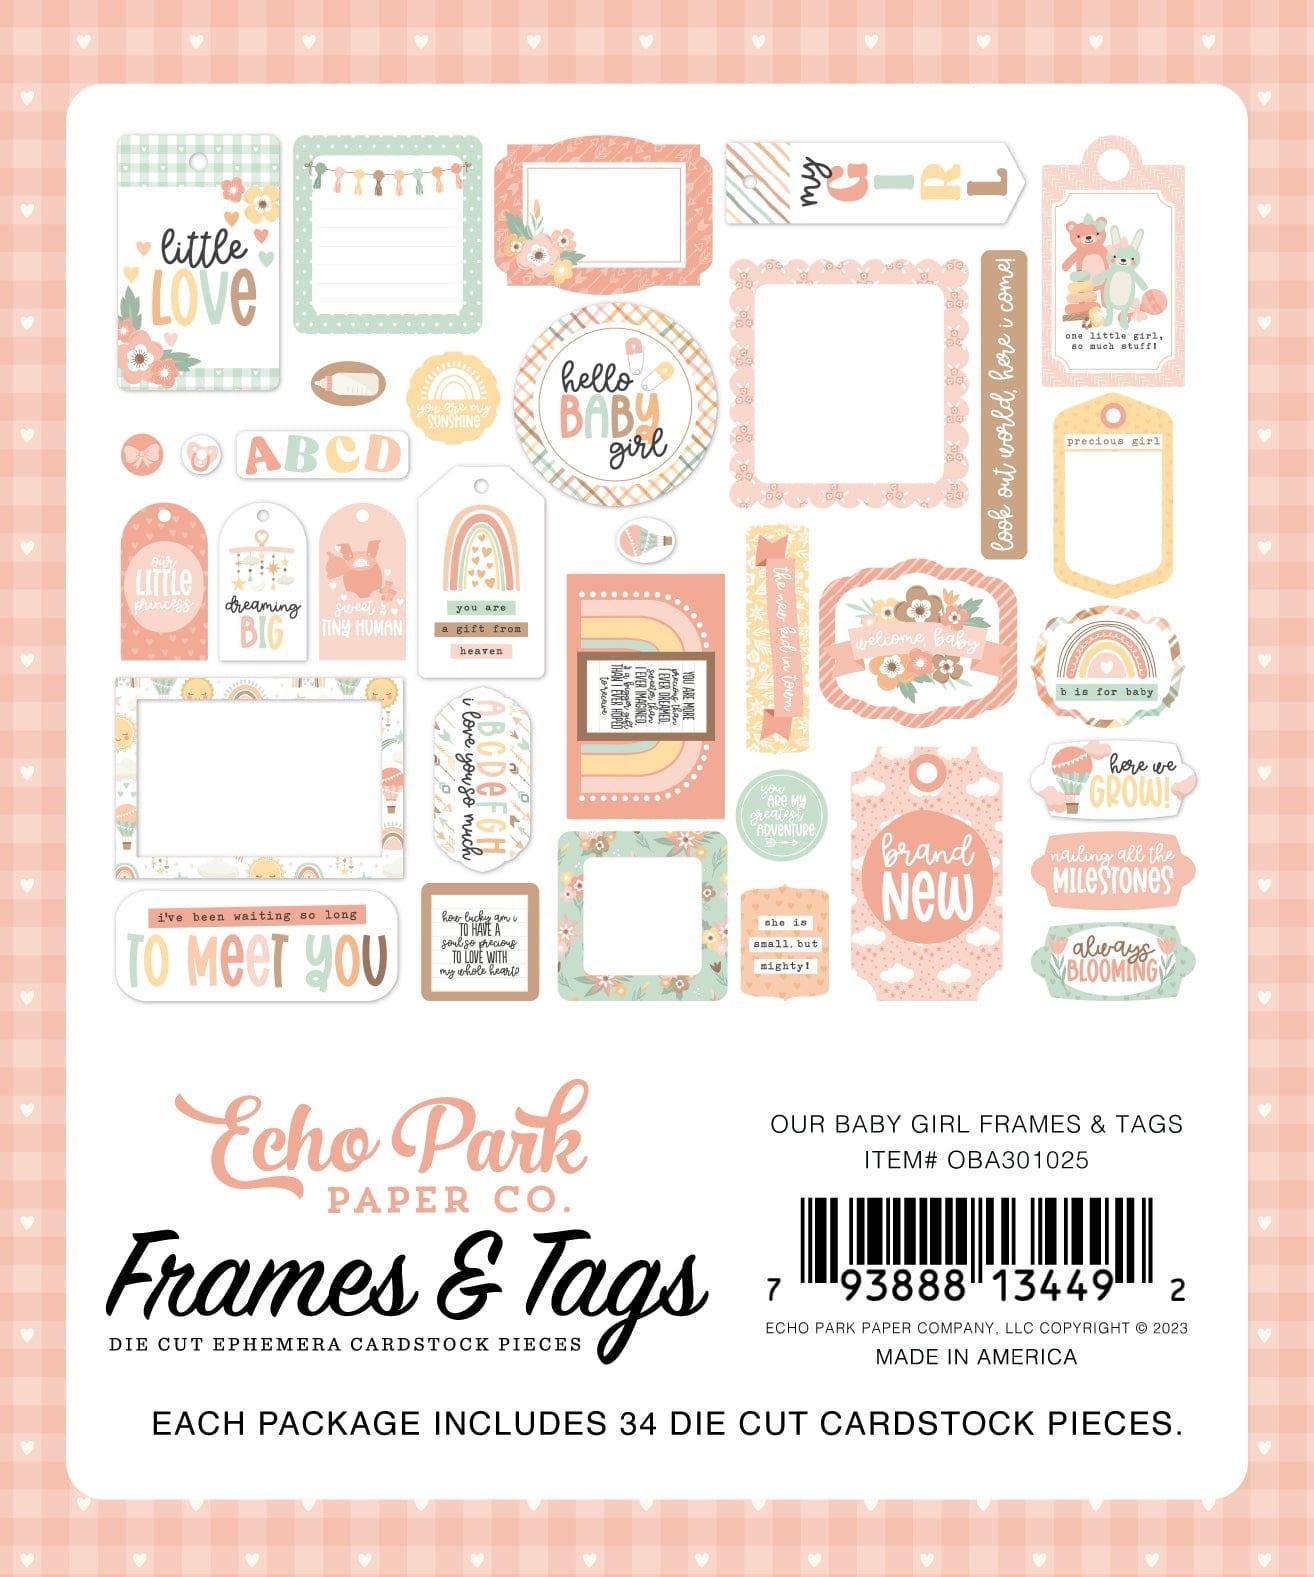 Our Baby Girl Collection 5 x 5 Scrapbook Tags & Frames Die Cuts by Echo Park Paper - Scrapbook Supply Companies